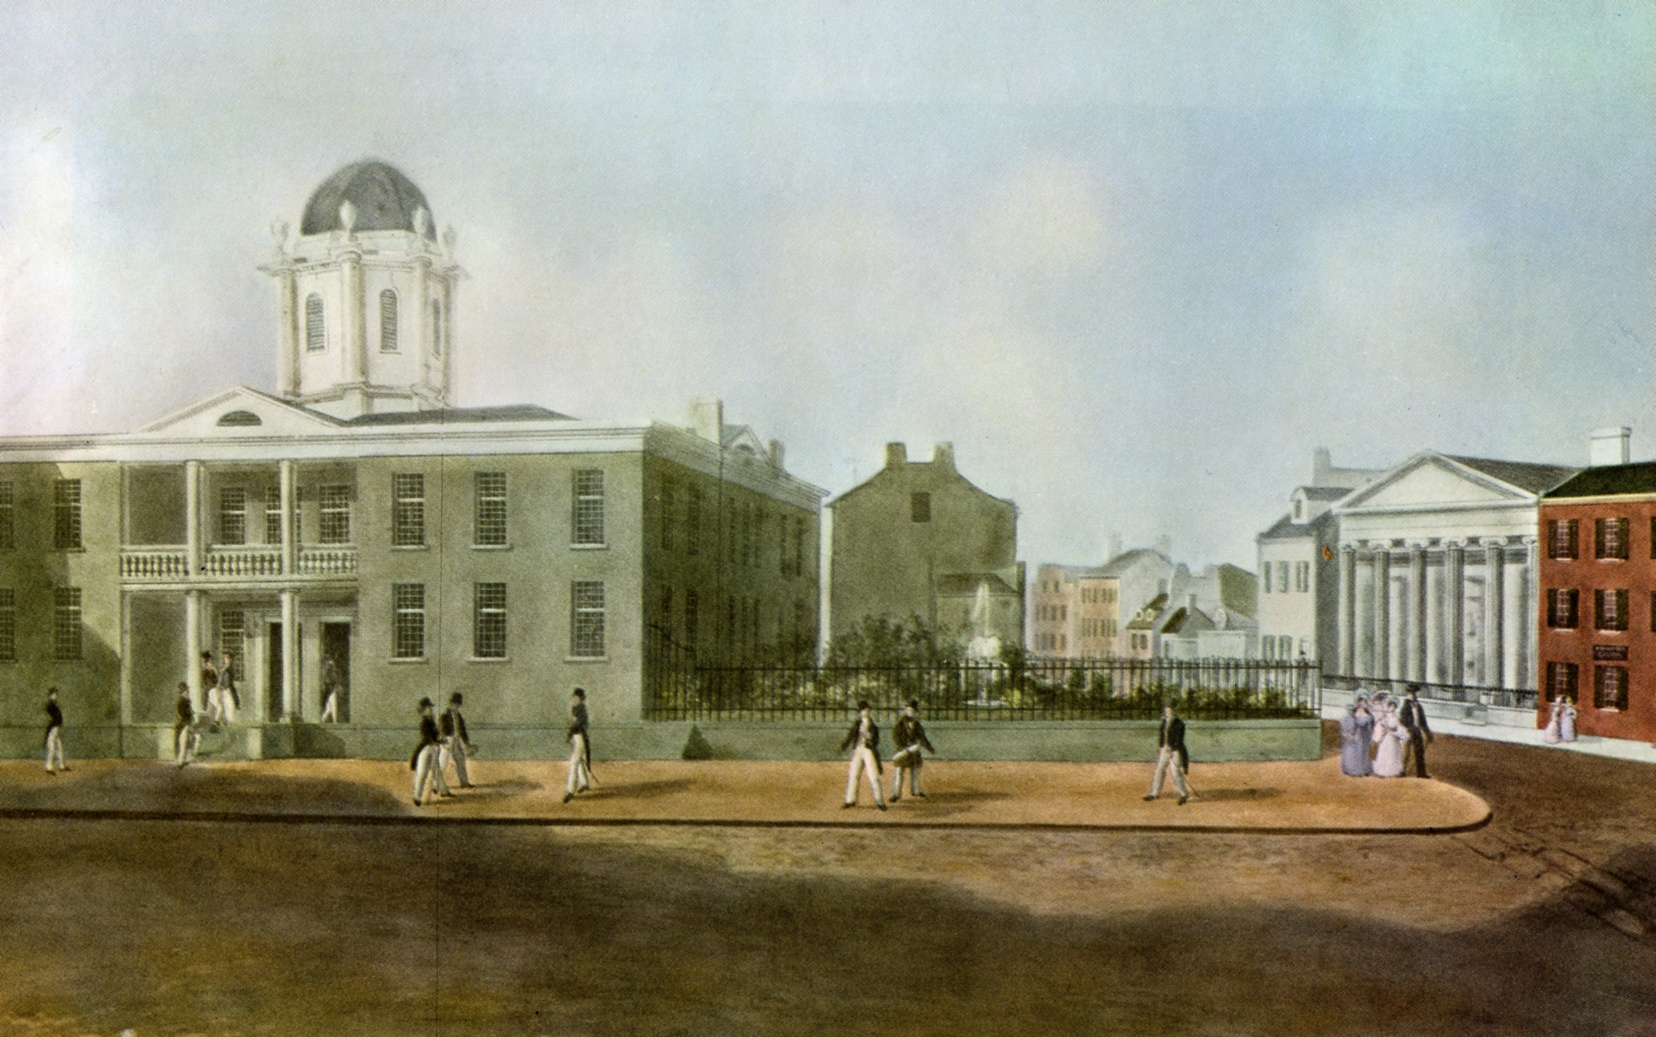 A early paining of the original Cincinnati College campus from 1819